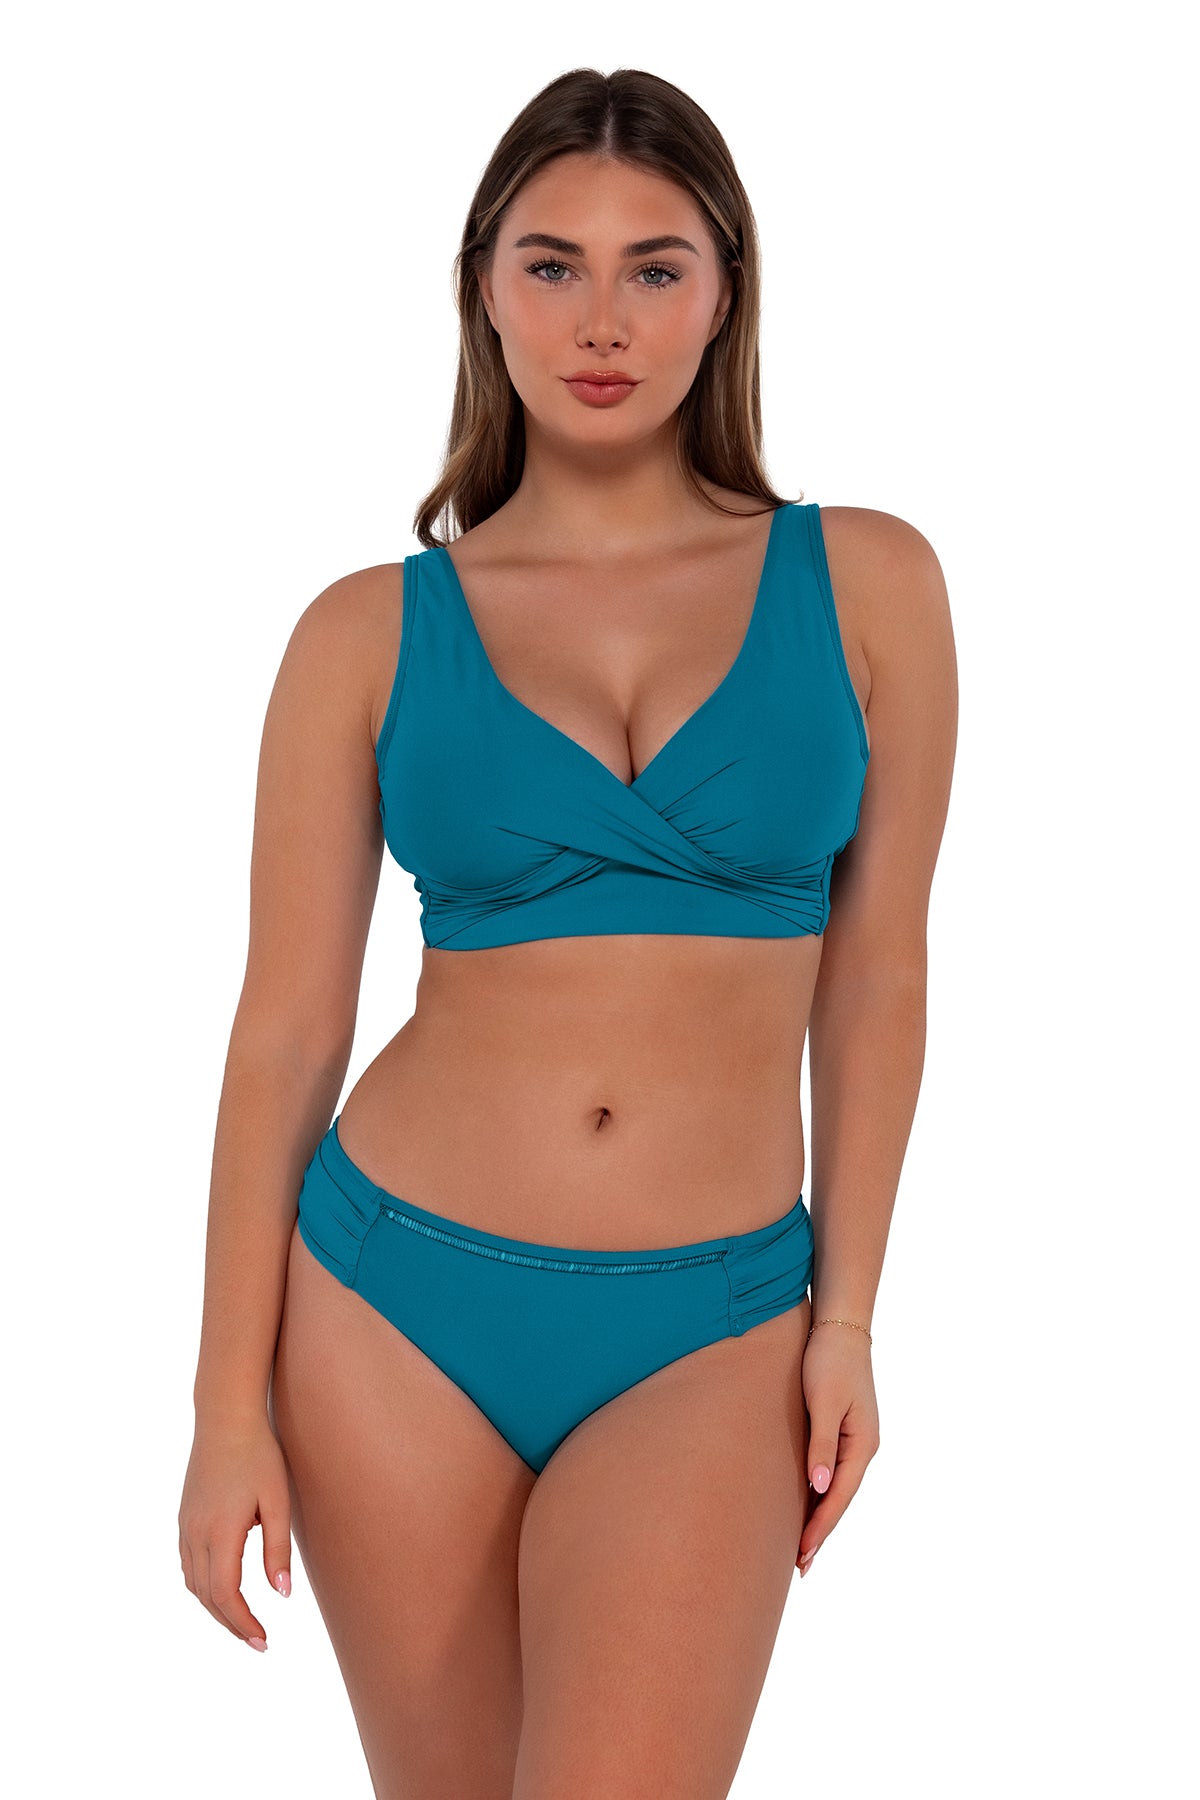 Front pose #1 of Taylor wearing Sunsets Avalon Teal Elsie Top paired with Audra Hipster bikini bottom